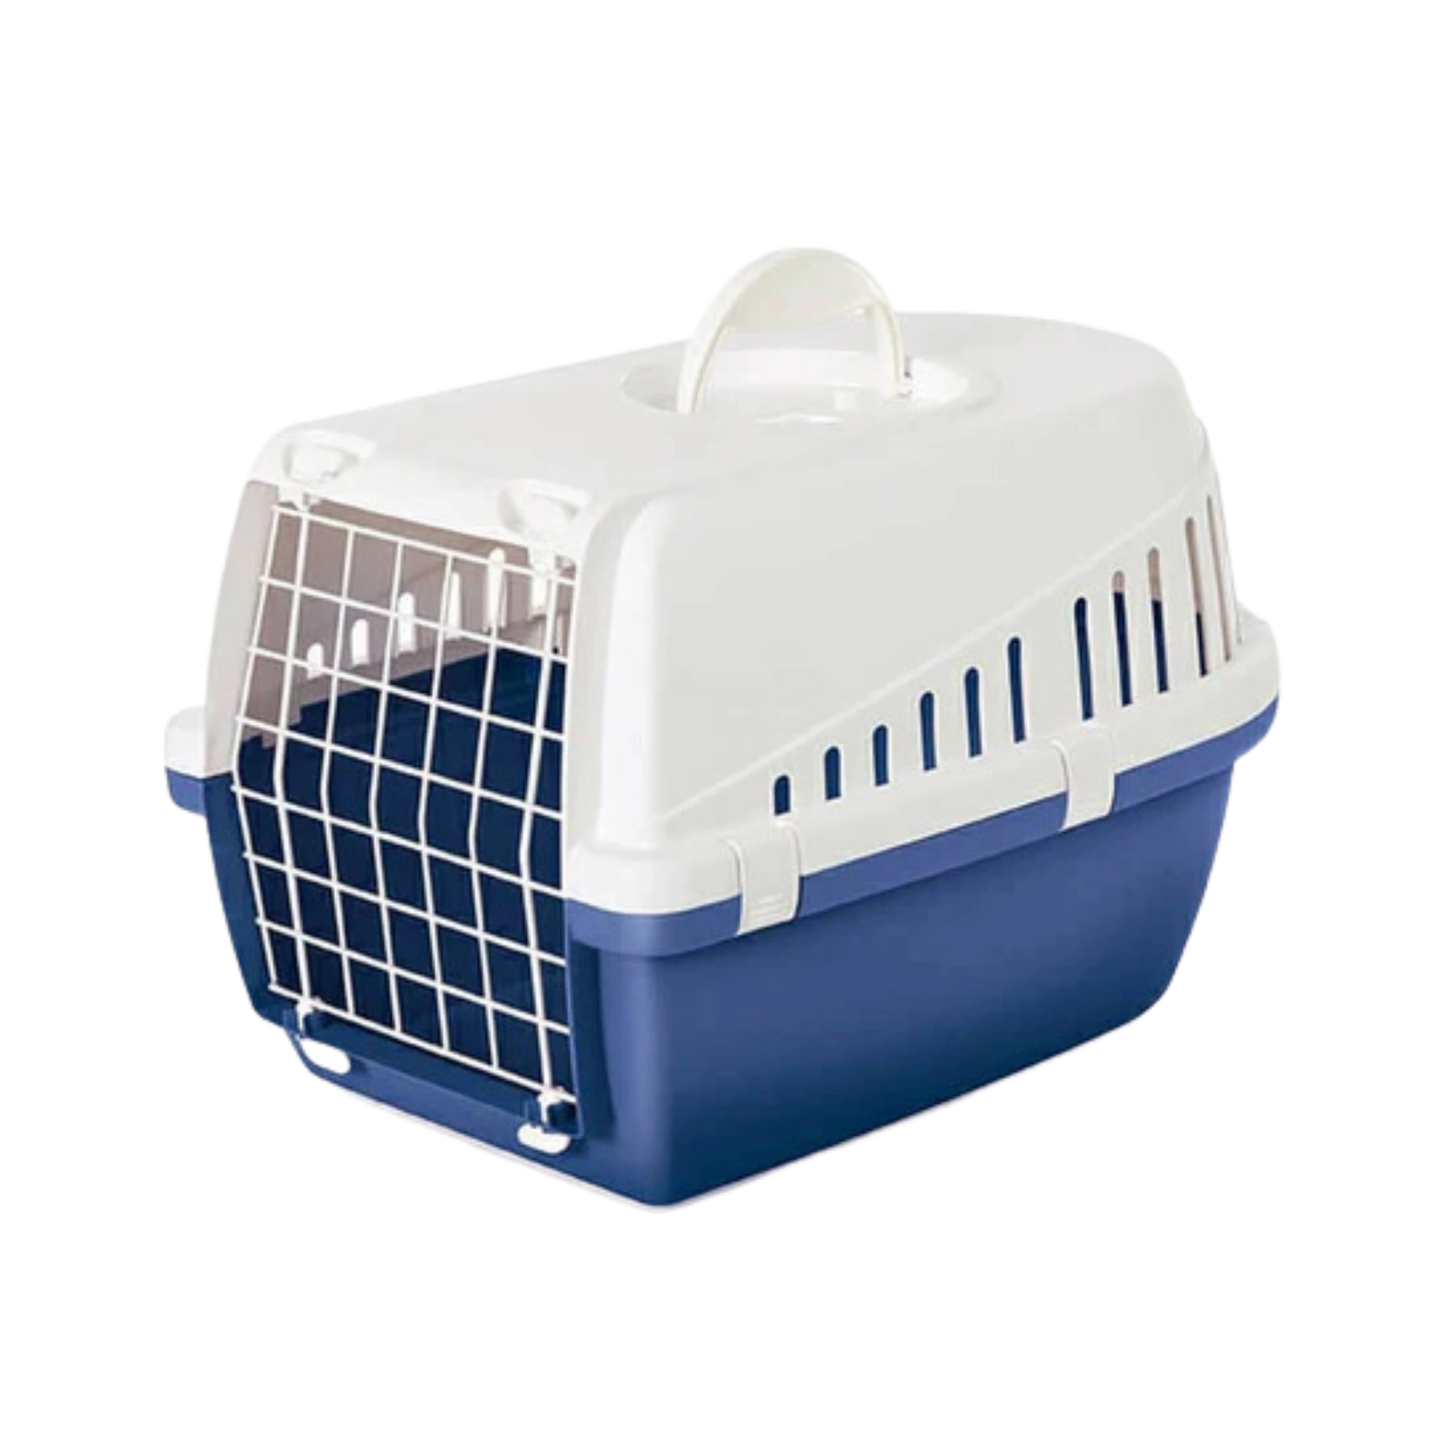 TROTTER 1 PET CARRIER NORDIC BLUE 19*13*12INCH